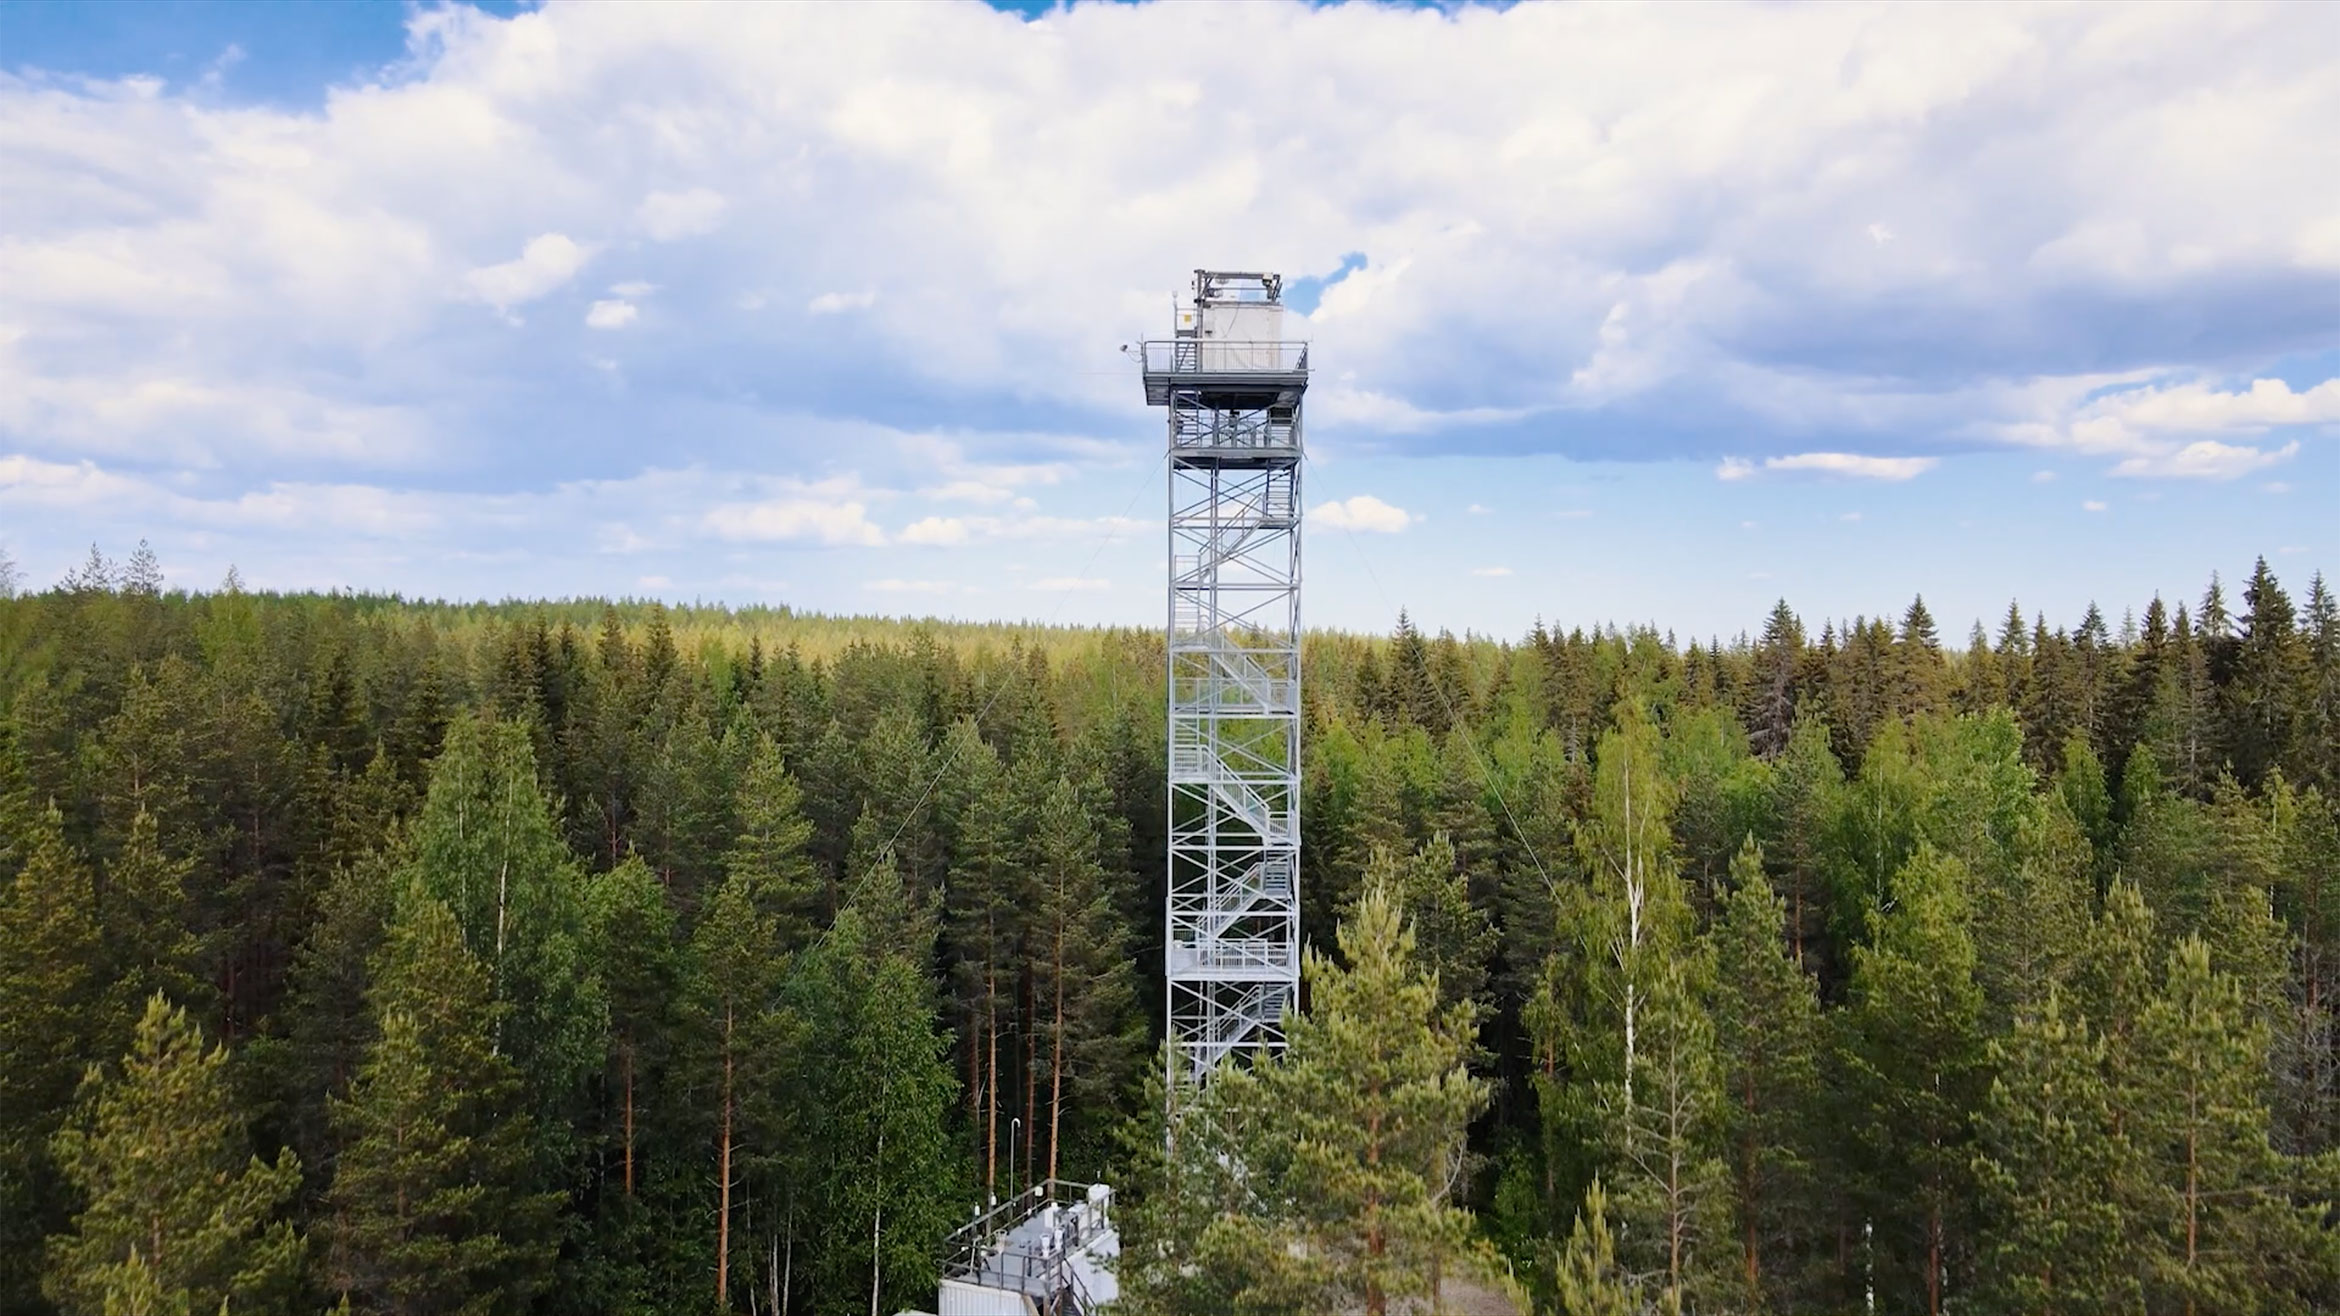 10-Hero-Scientific-research-station-forest.jpg